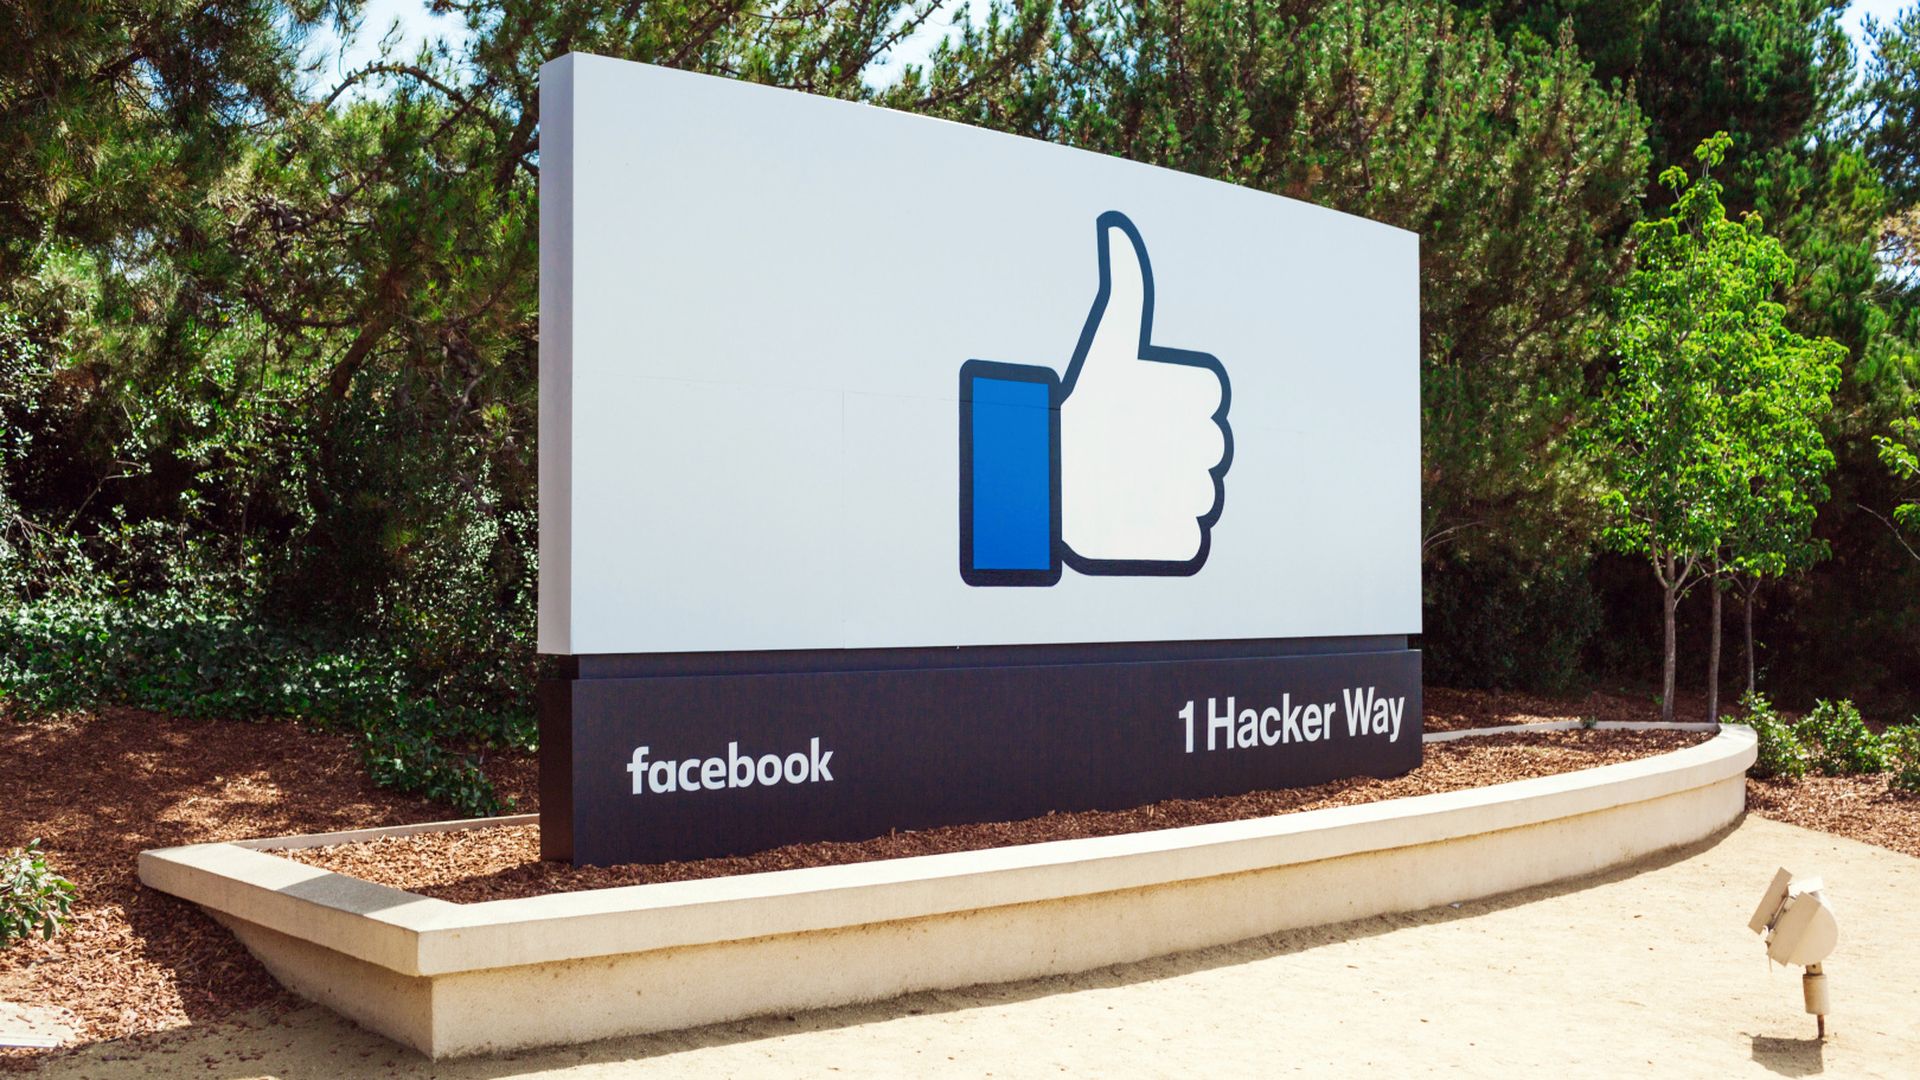 A Thumbs Up sign at Facebook's headquarters